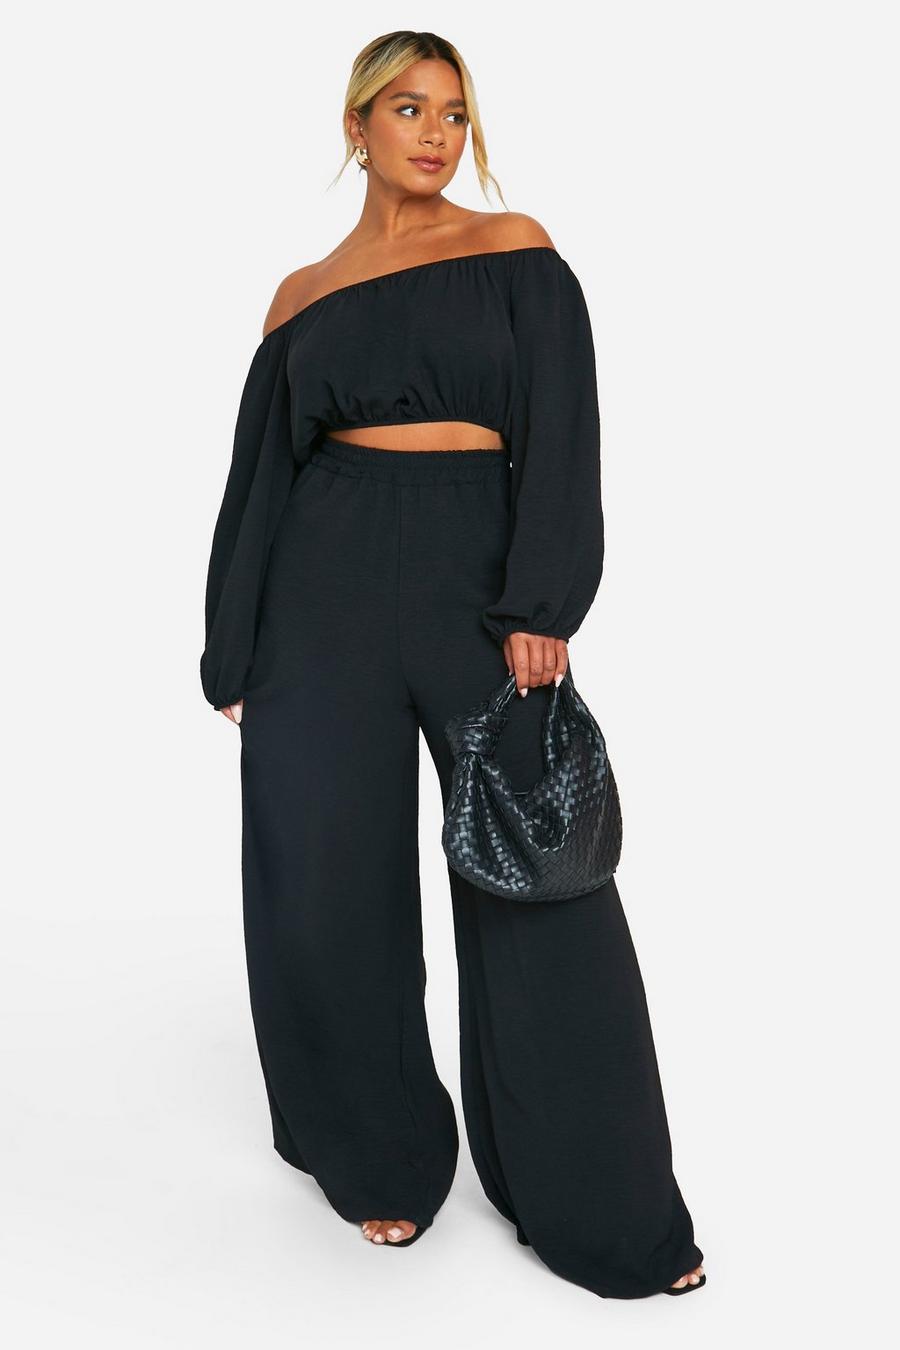 Black Plus Textured Bardot Top And Relaxed Fit Pants image number 1